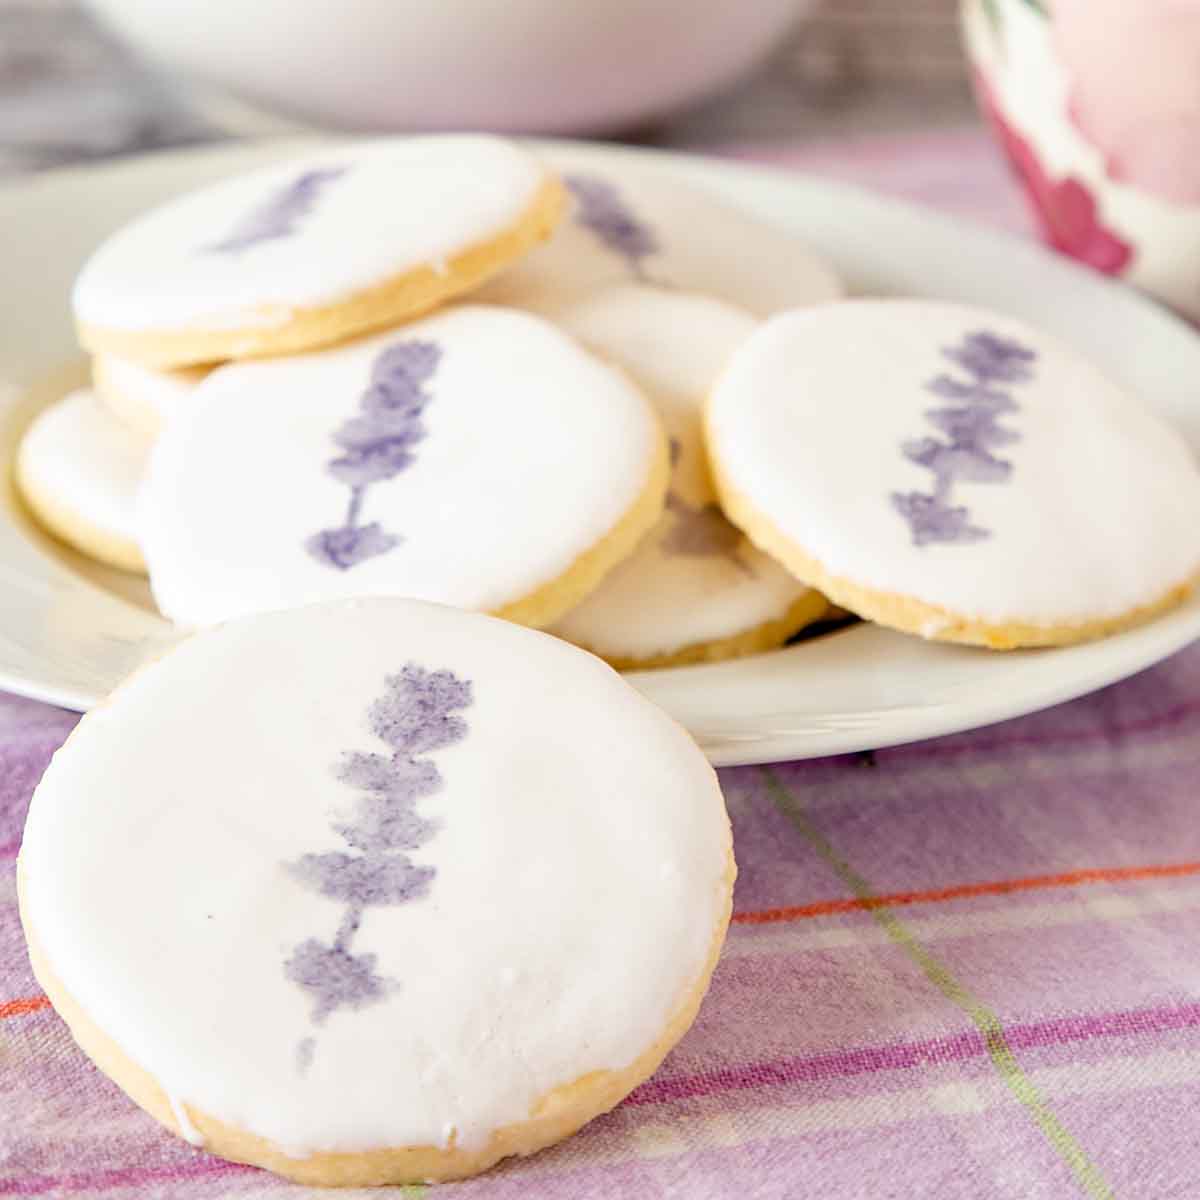 Lavender Shortbread With Fruits, Flowers, and Herbs Recipe